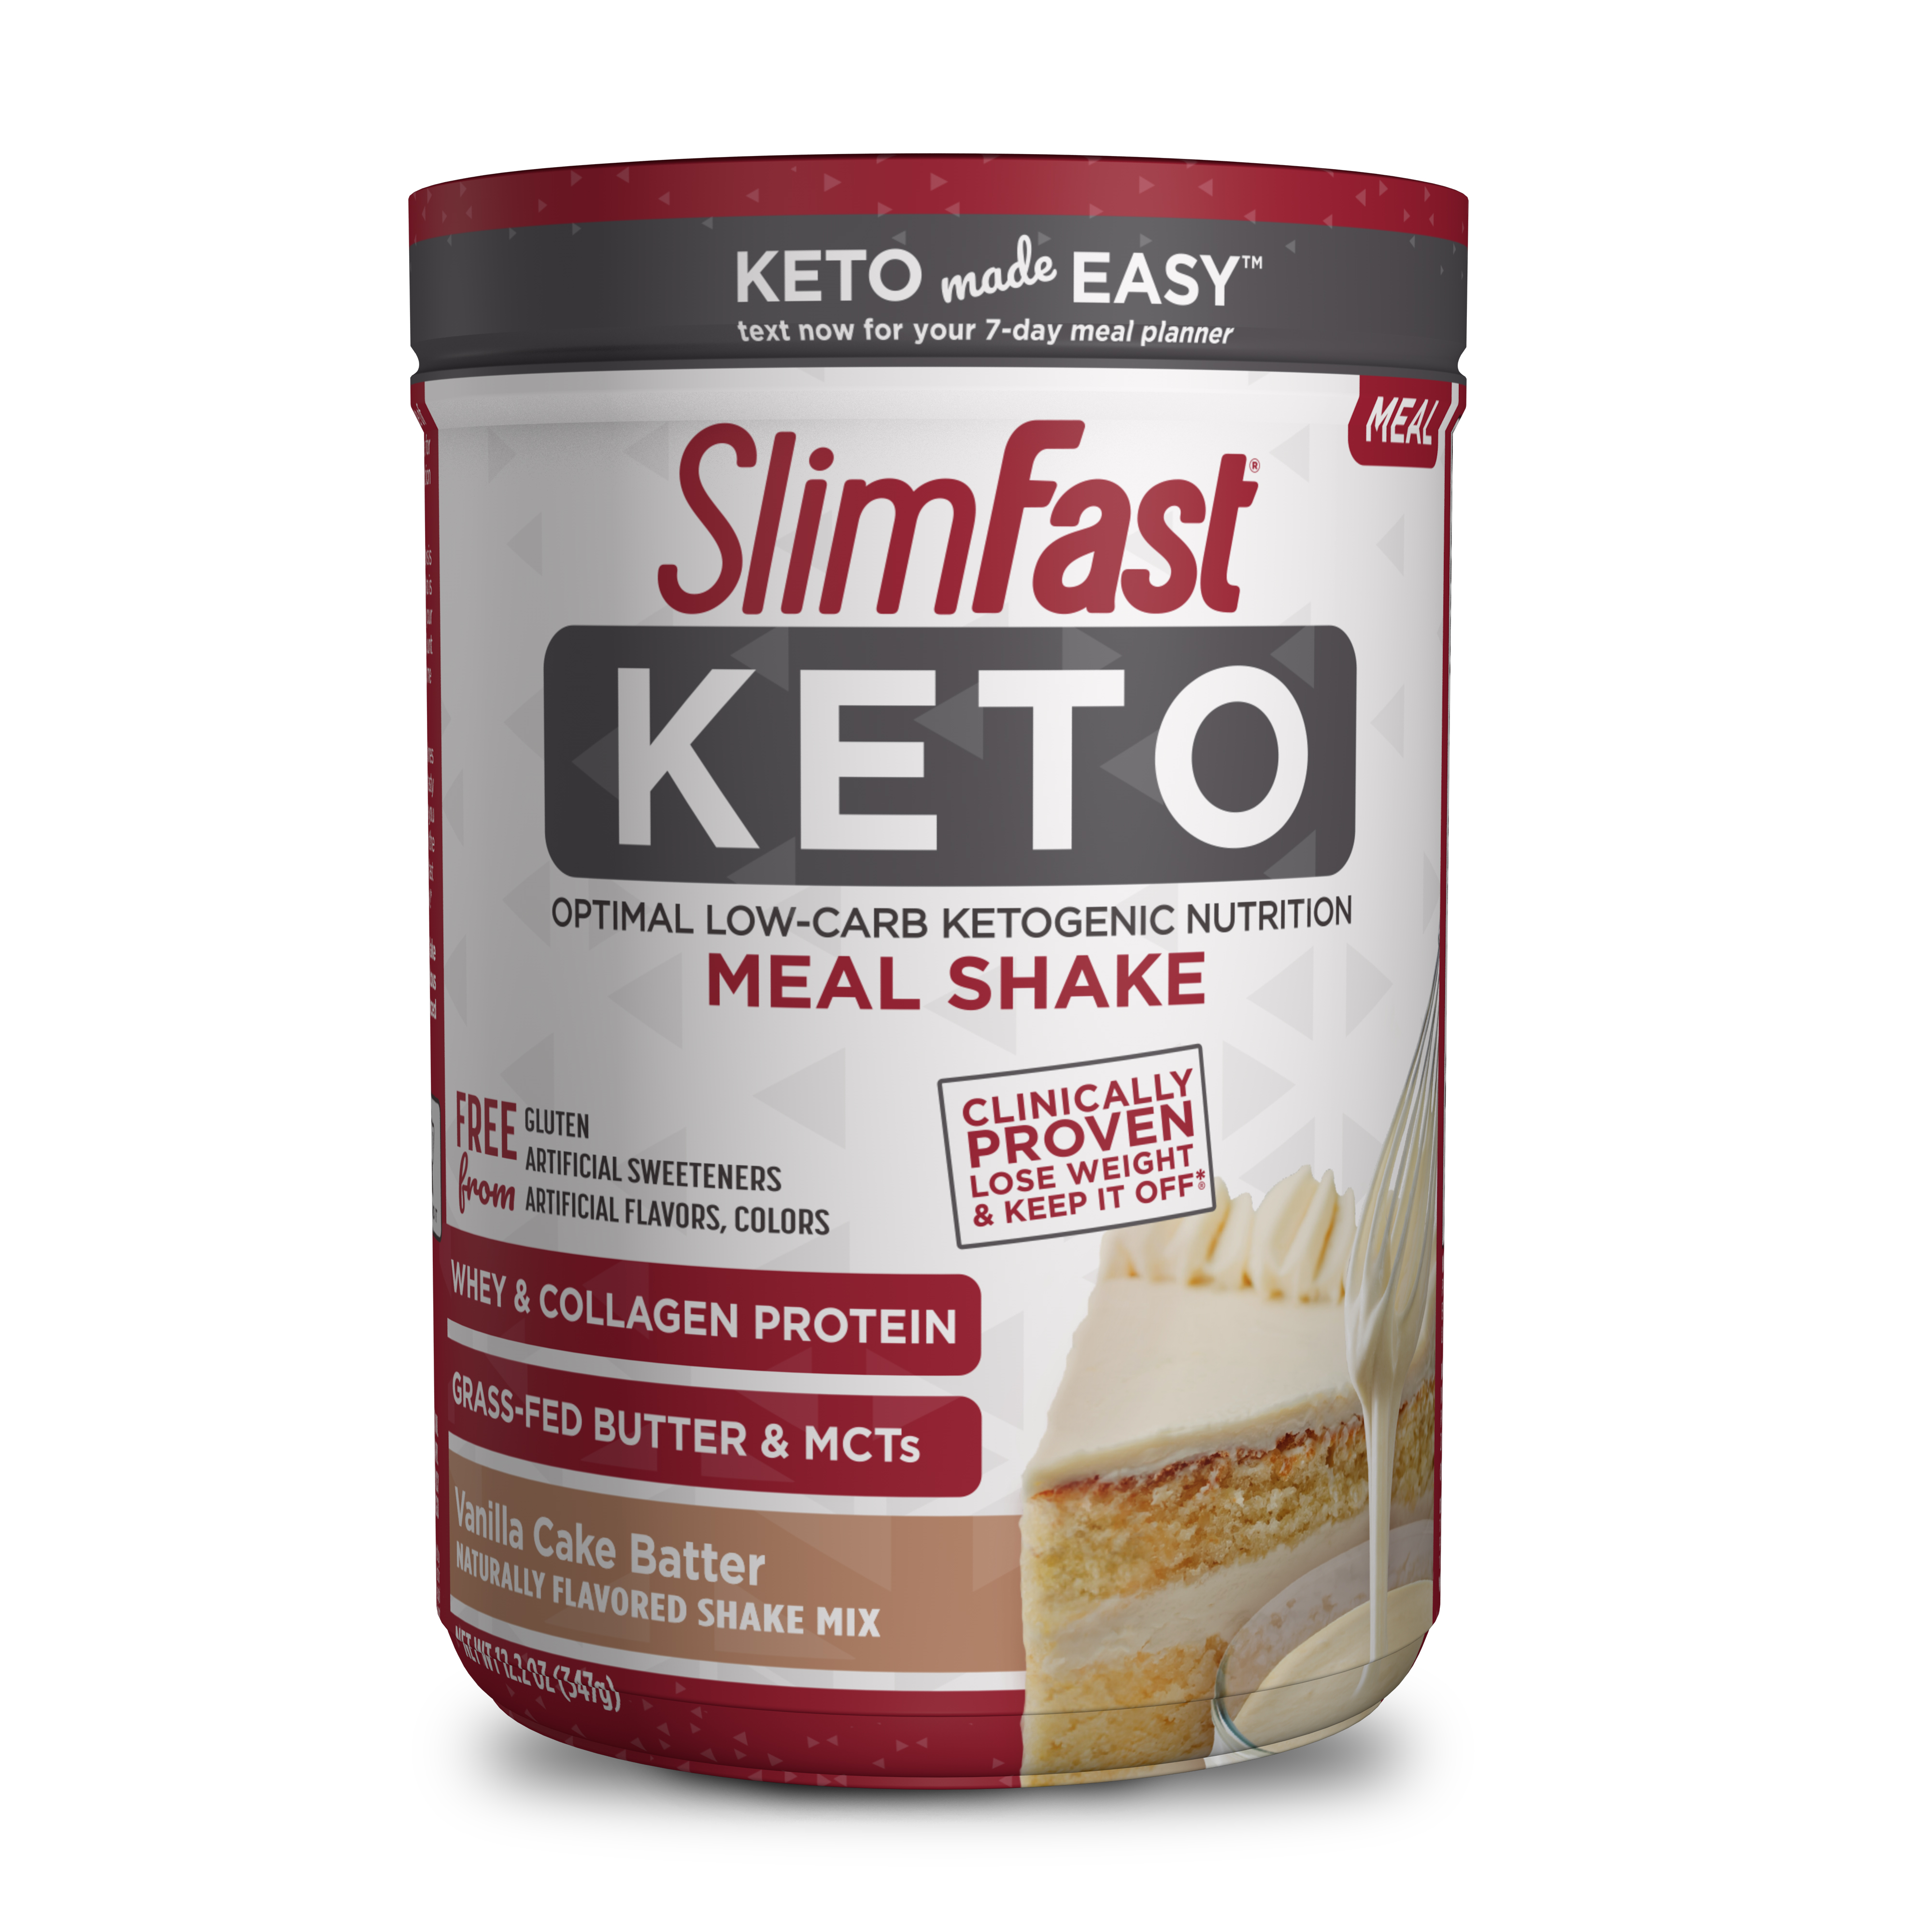 SlimFast Keto Meal Replacement Shake Powder, Vanilla Cake Batter, 12.2 Oz. Canister (10 servings) - image 1 of 8